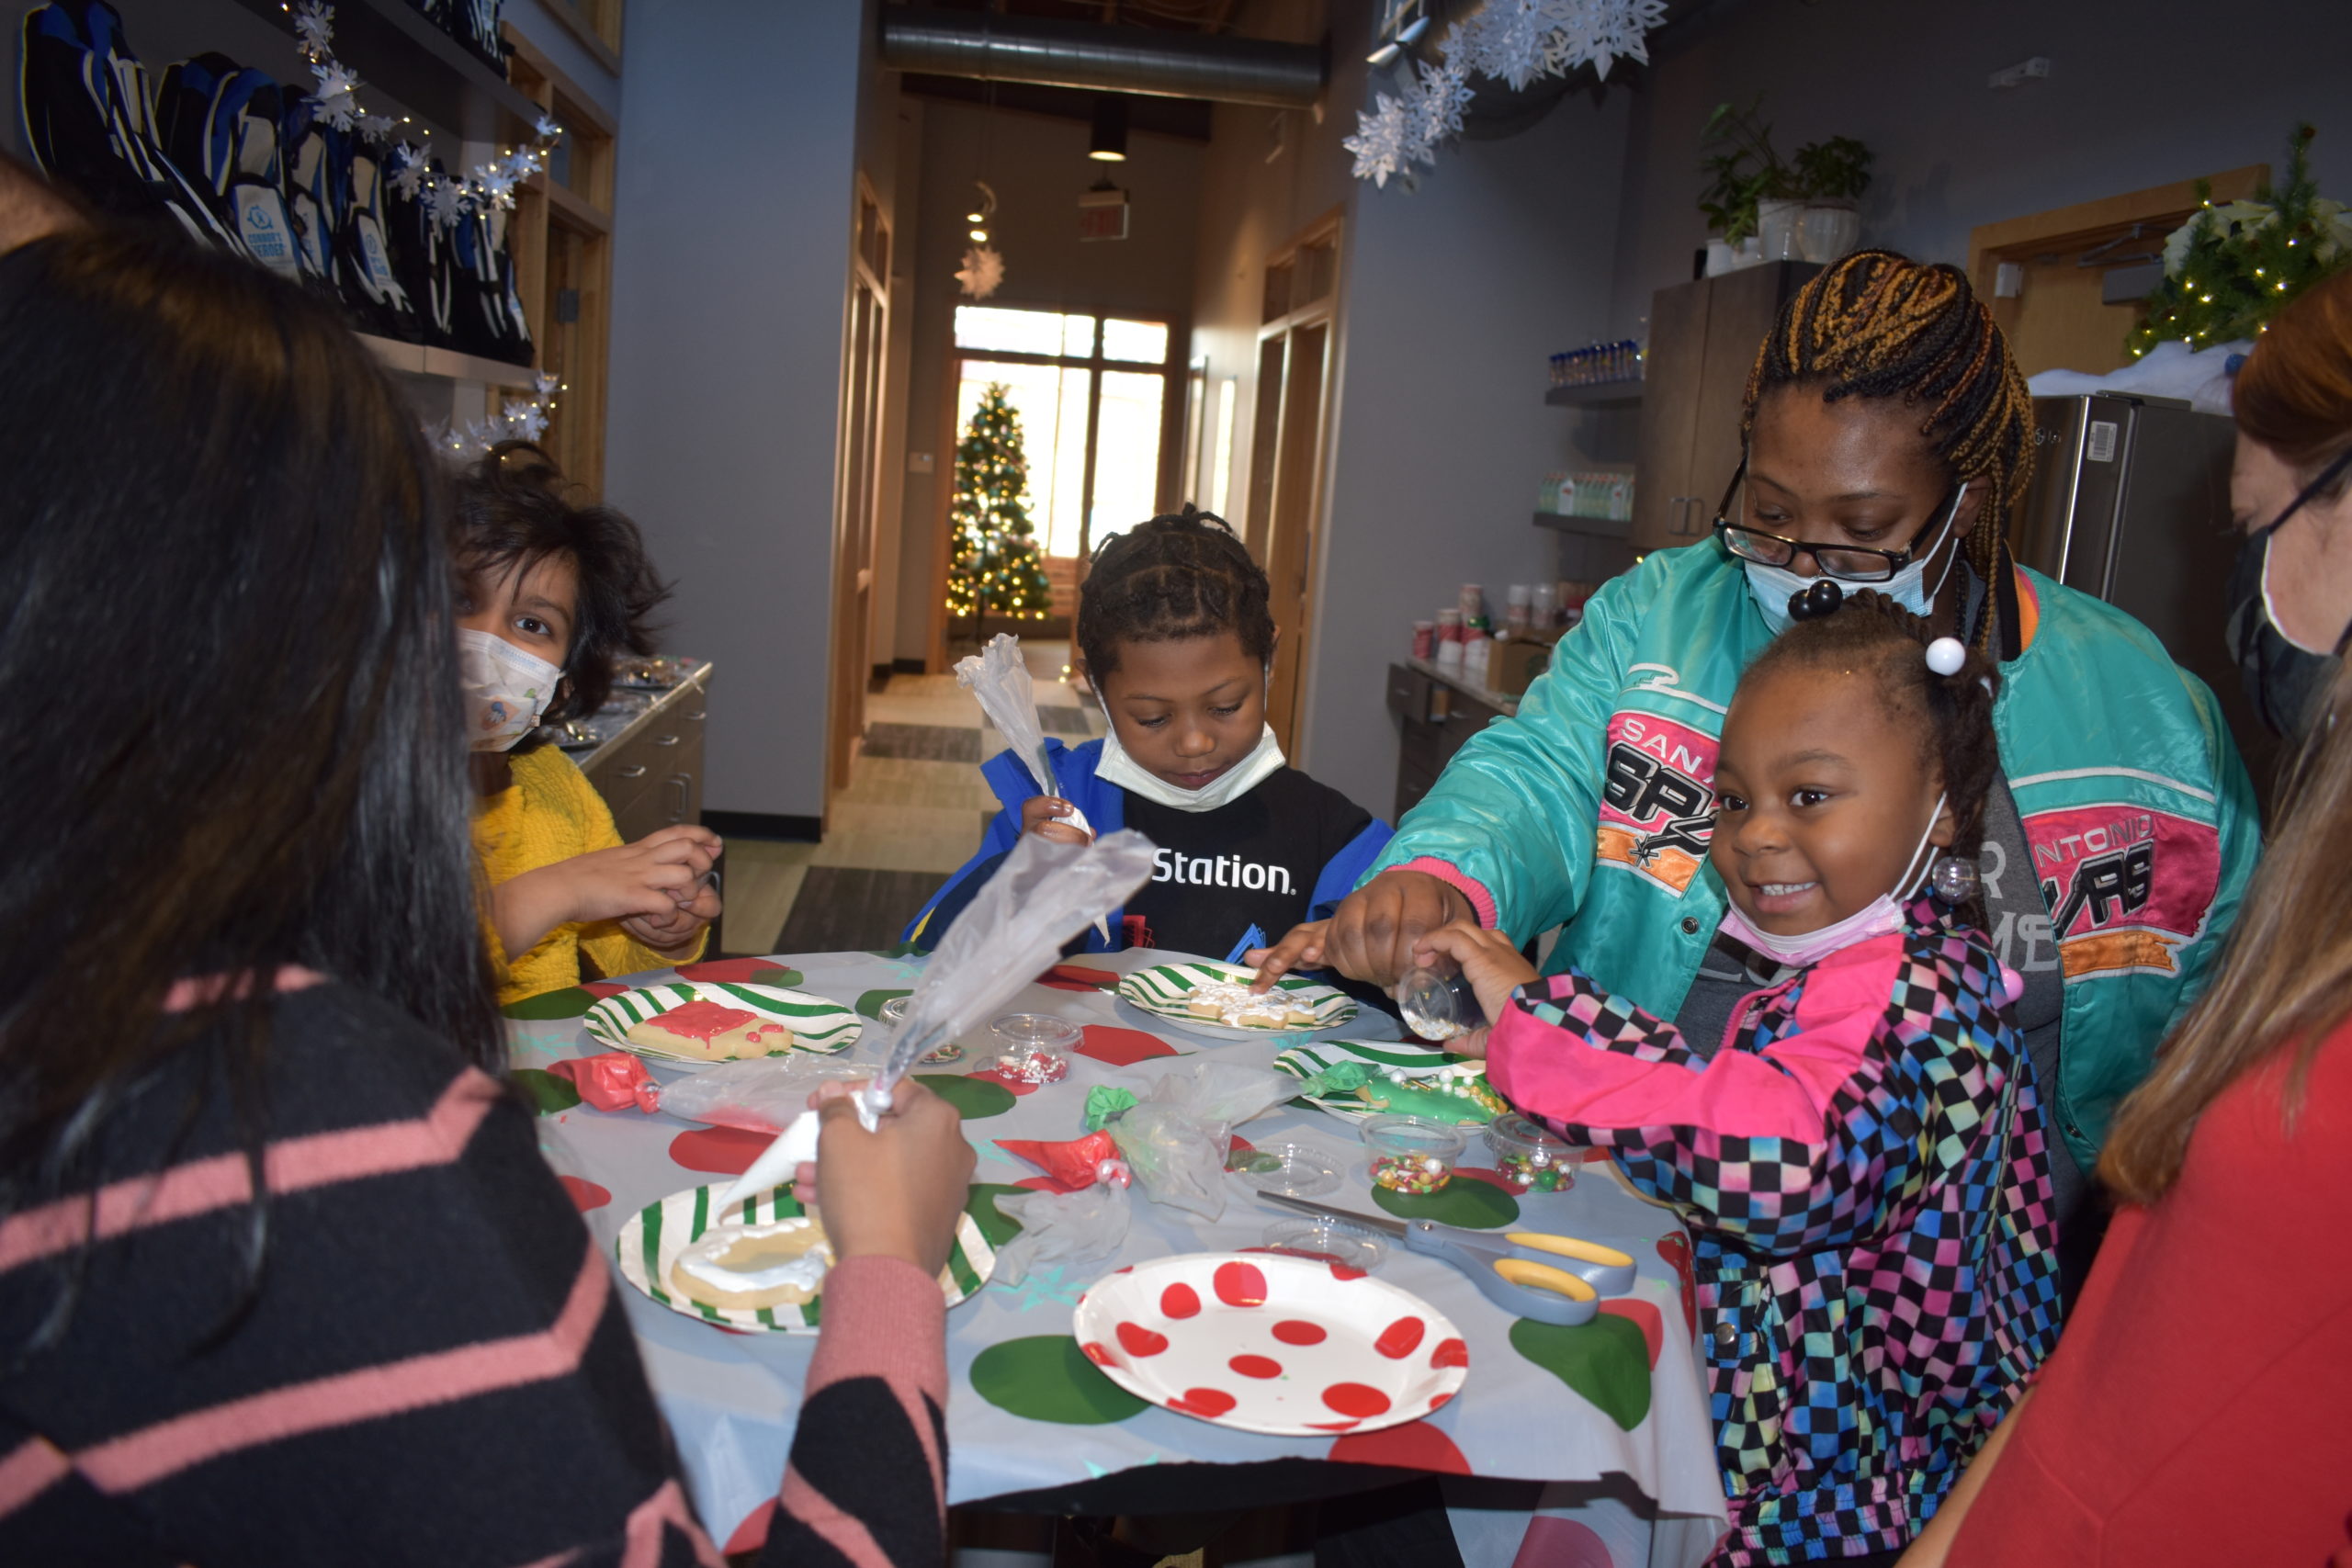 A group of children sitting together at a table decorating cookies with icing